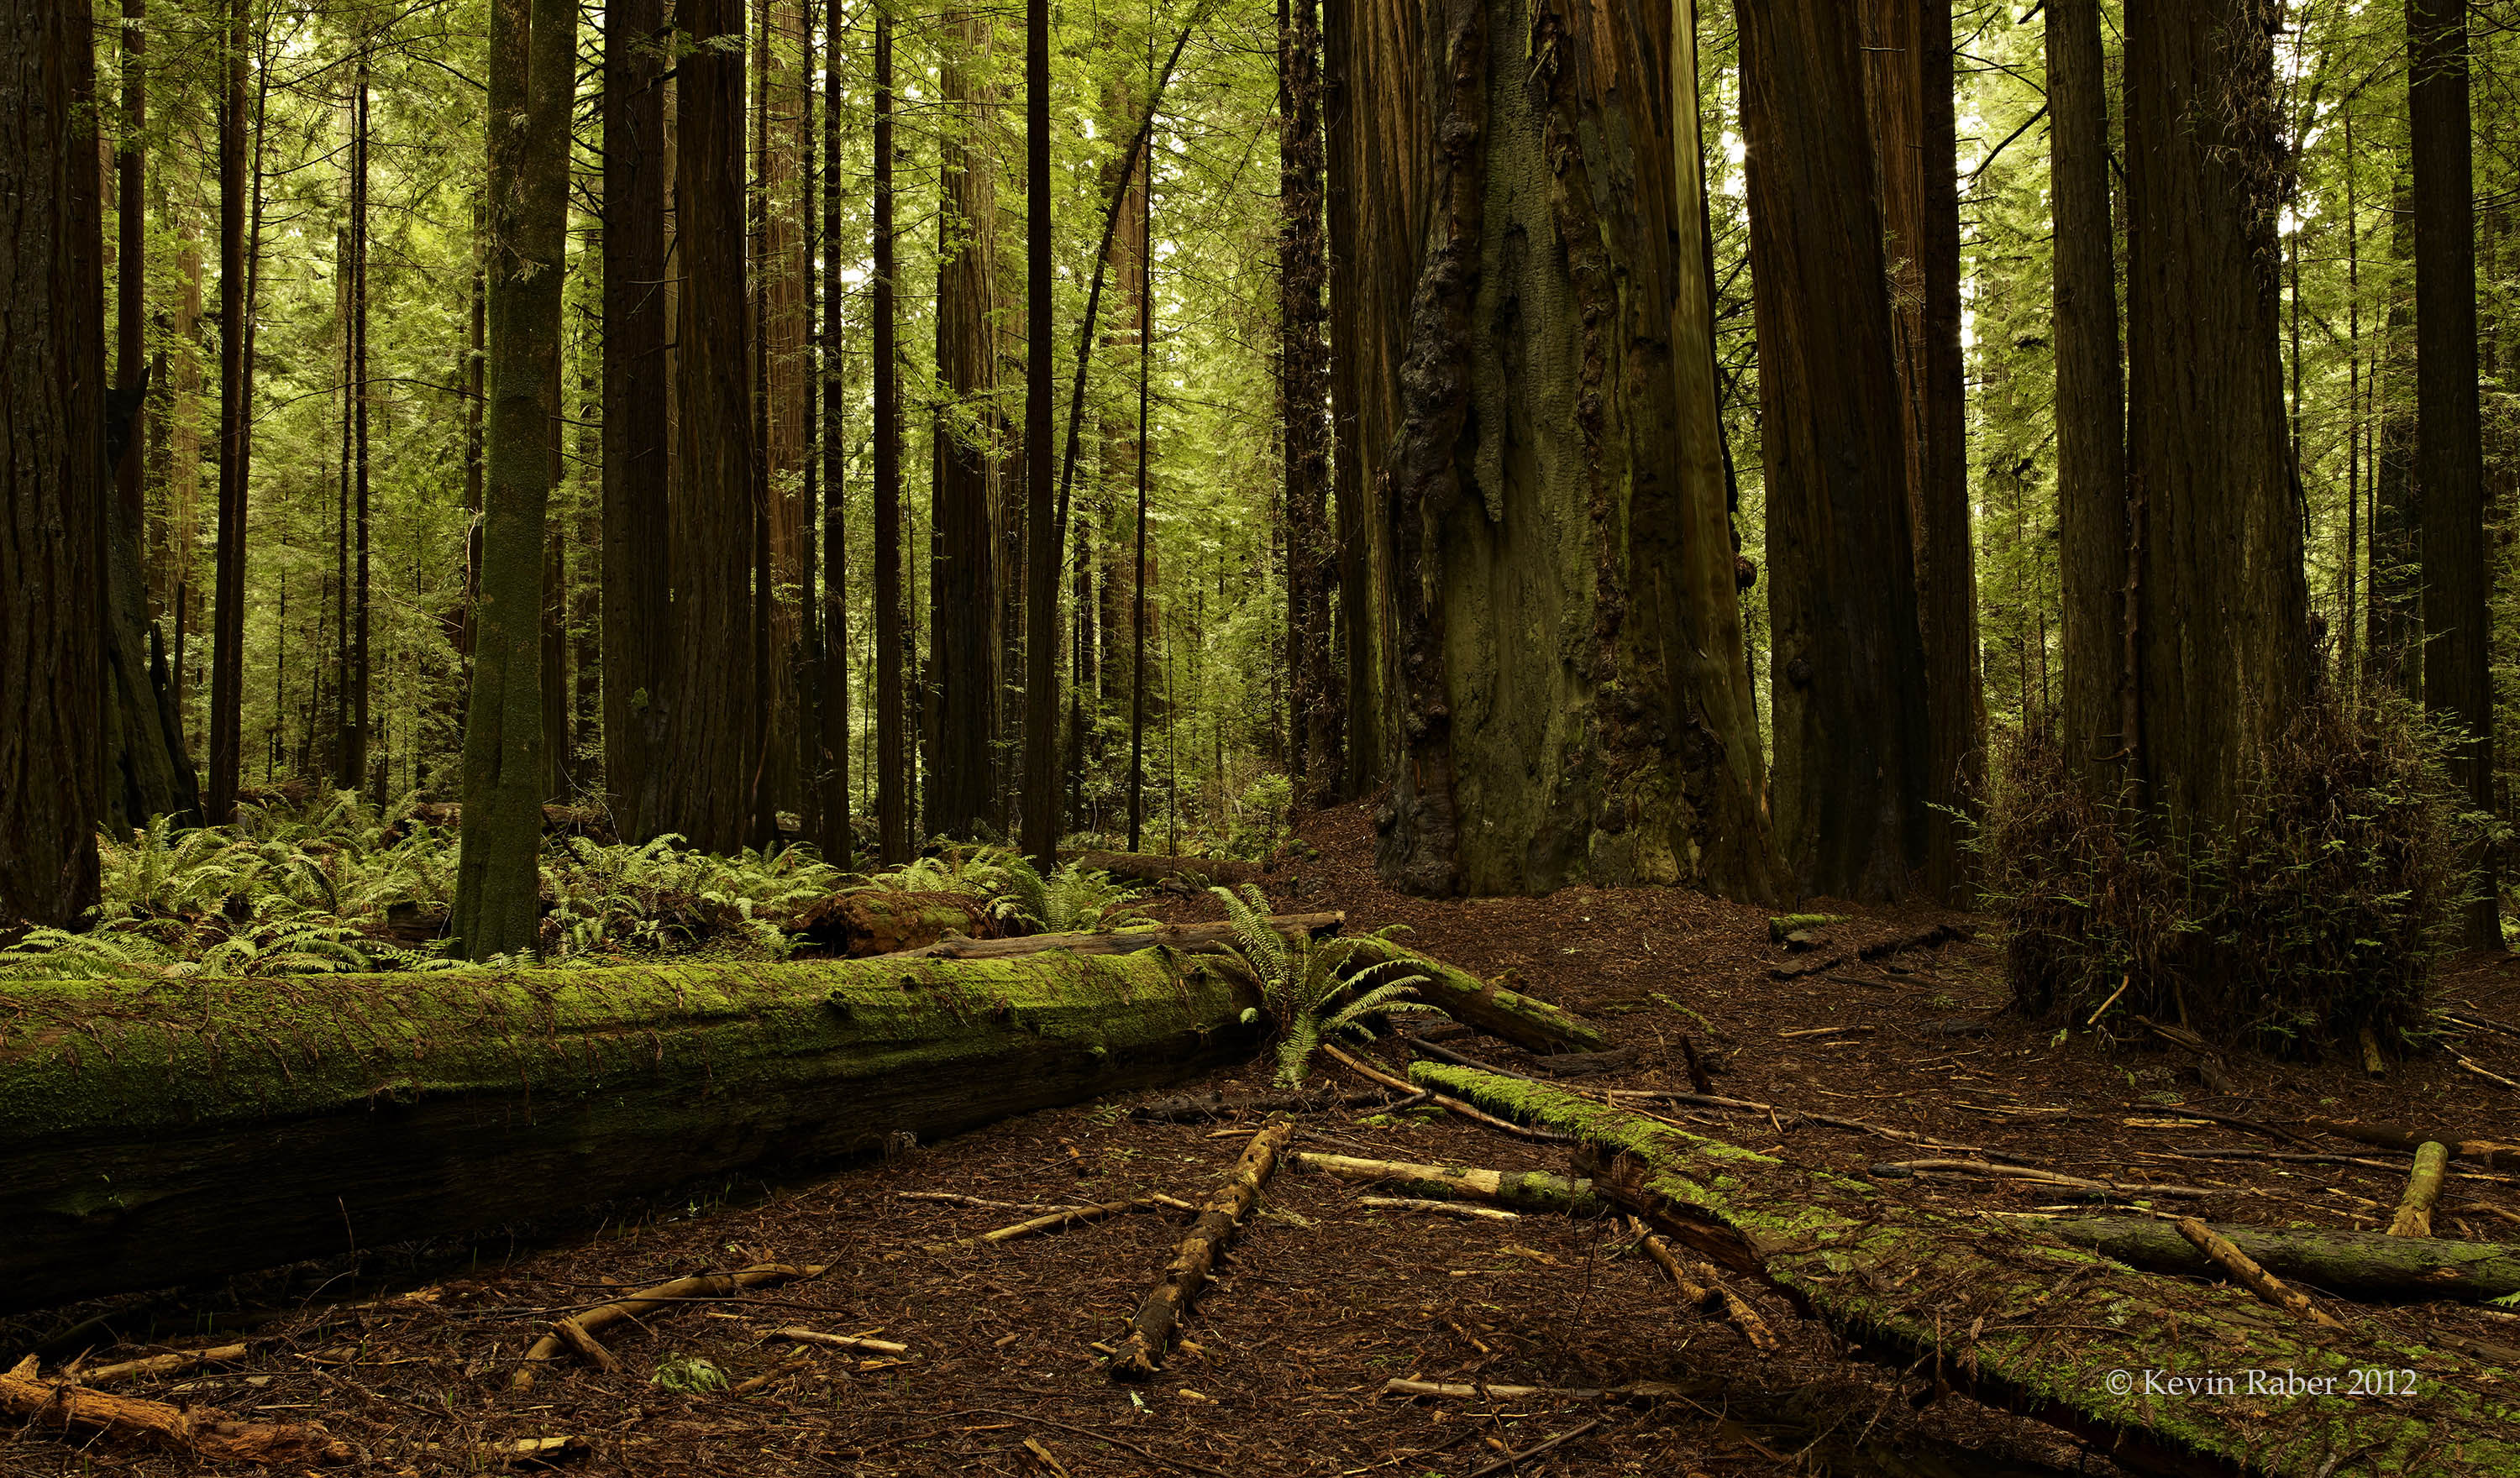 One Of My Many Images Of The Redwood Forrest